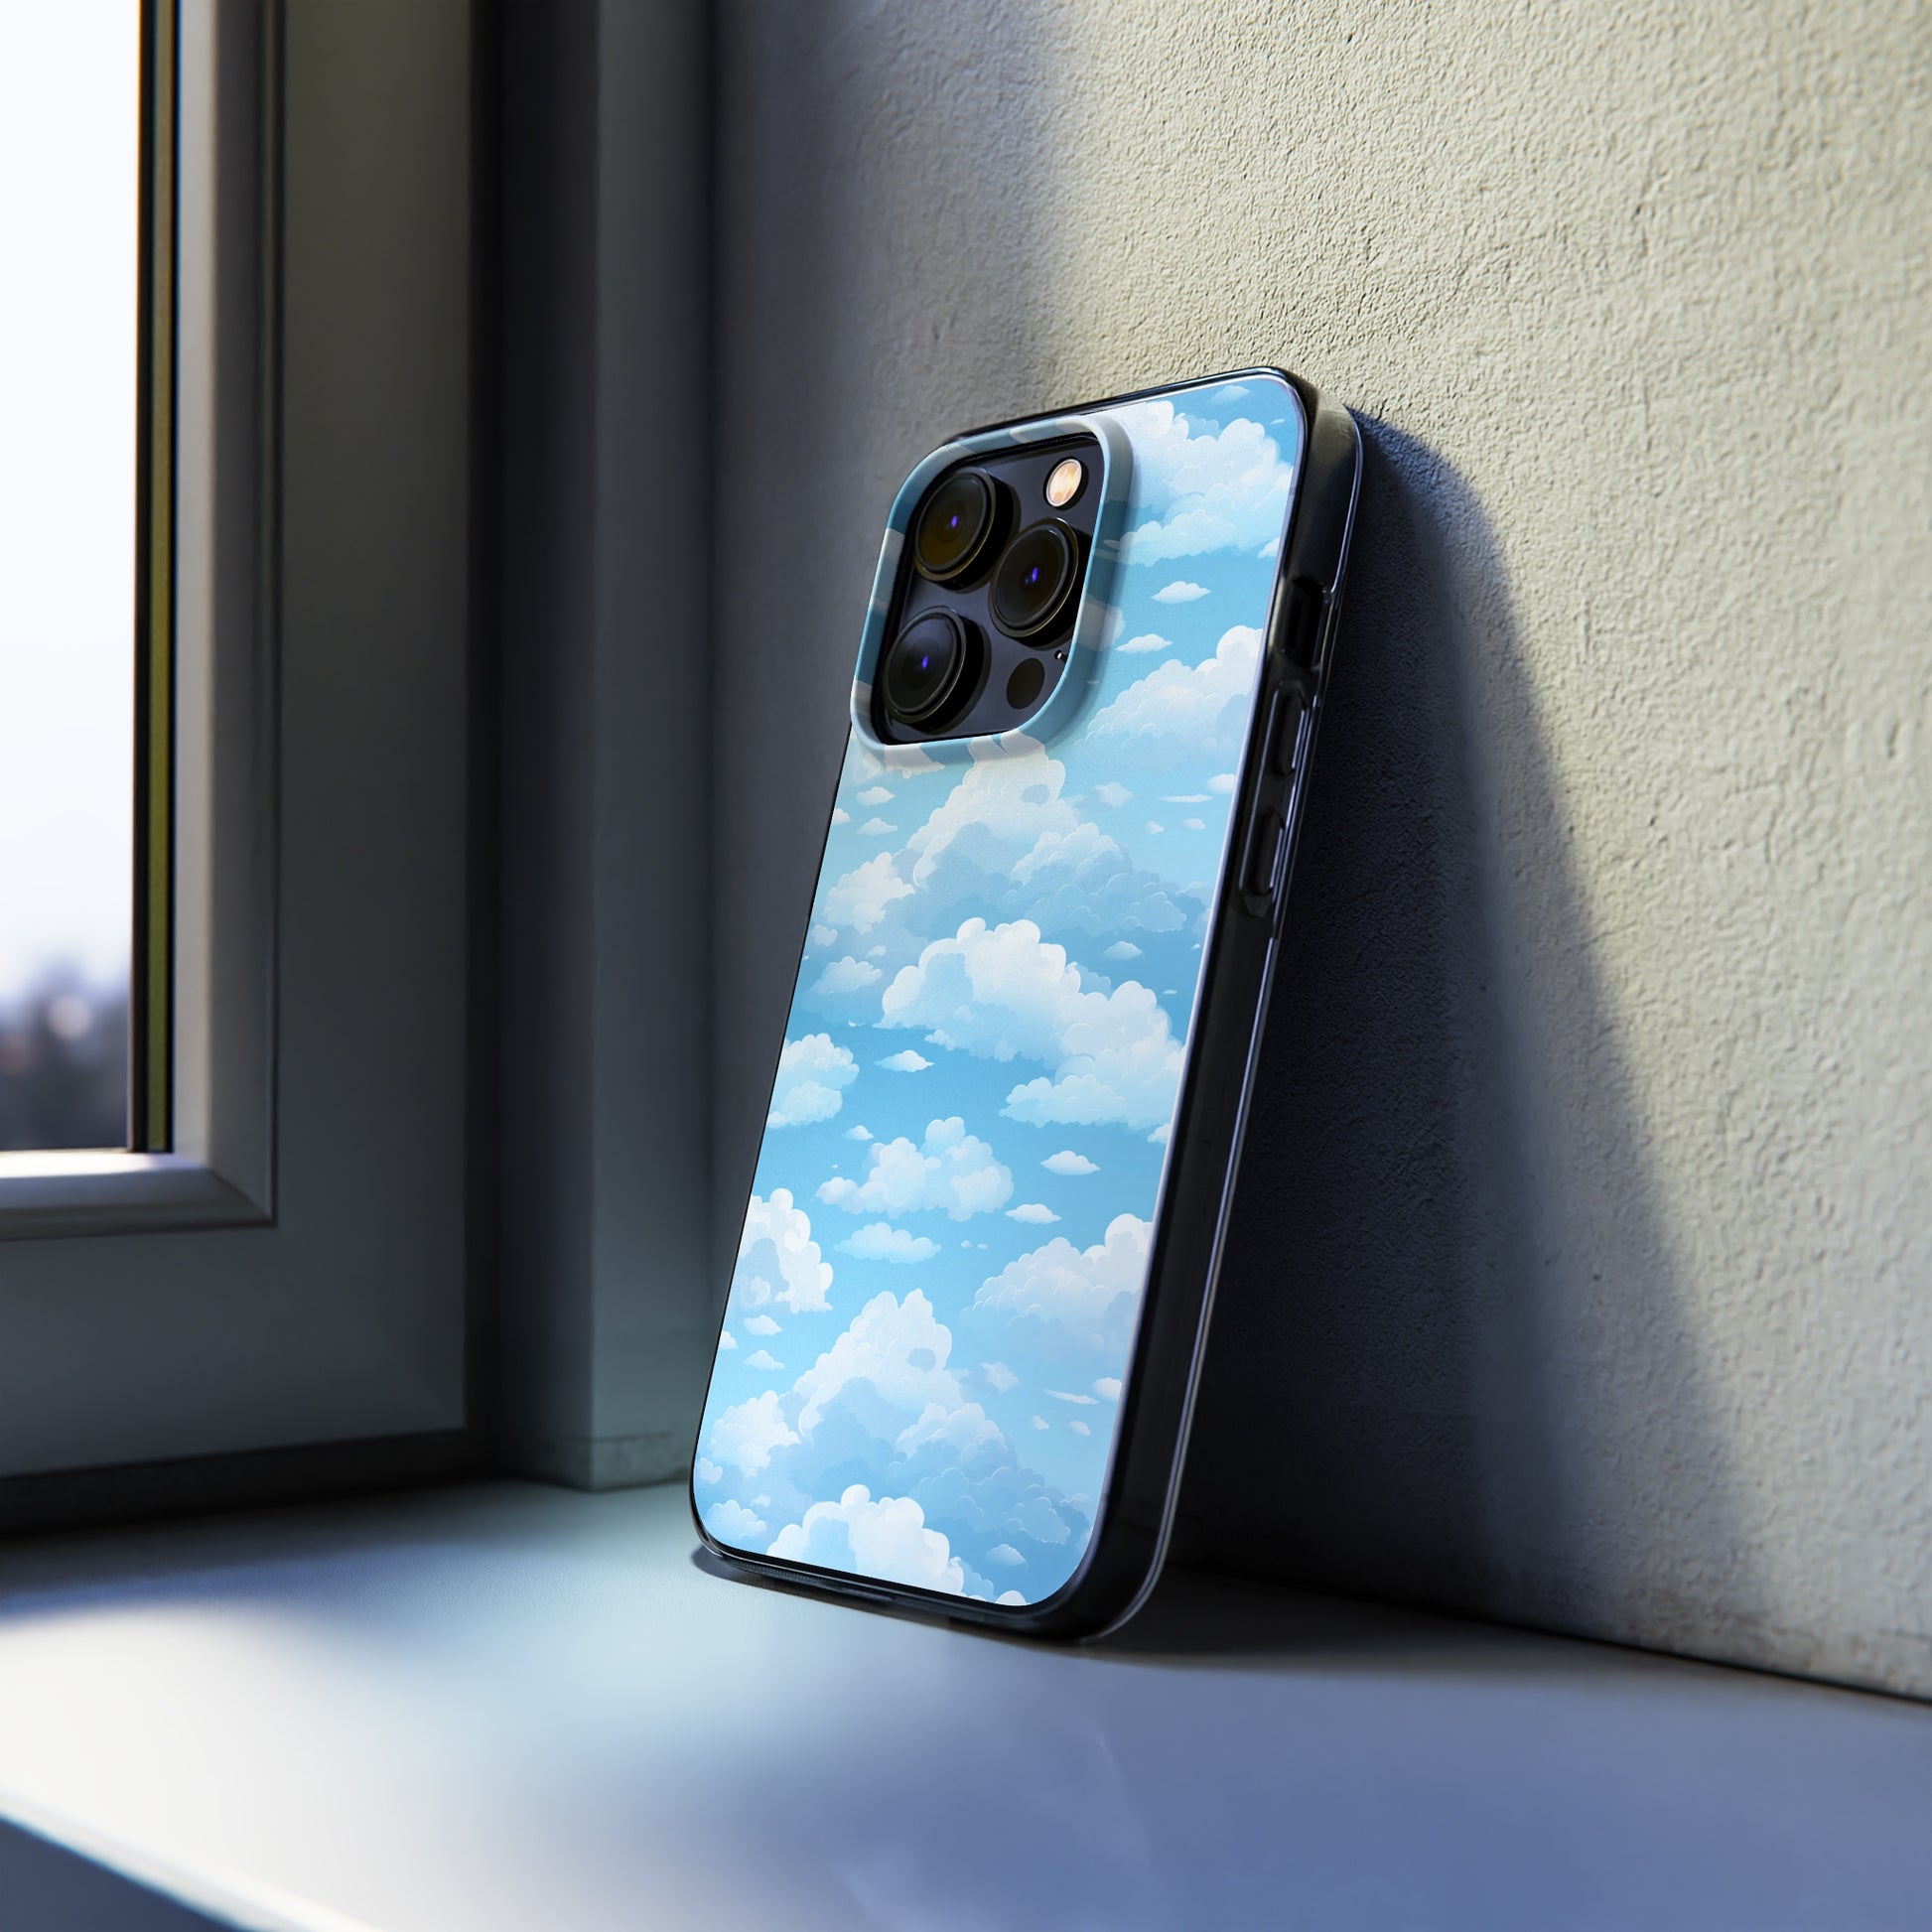 Boundless Azure Horizon - Calm Sky Design Soft Phone Case for IPhone, Samsung, and Google Pixel Phone Case Pattern Symphony   